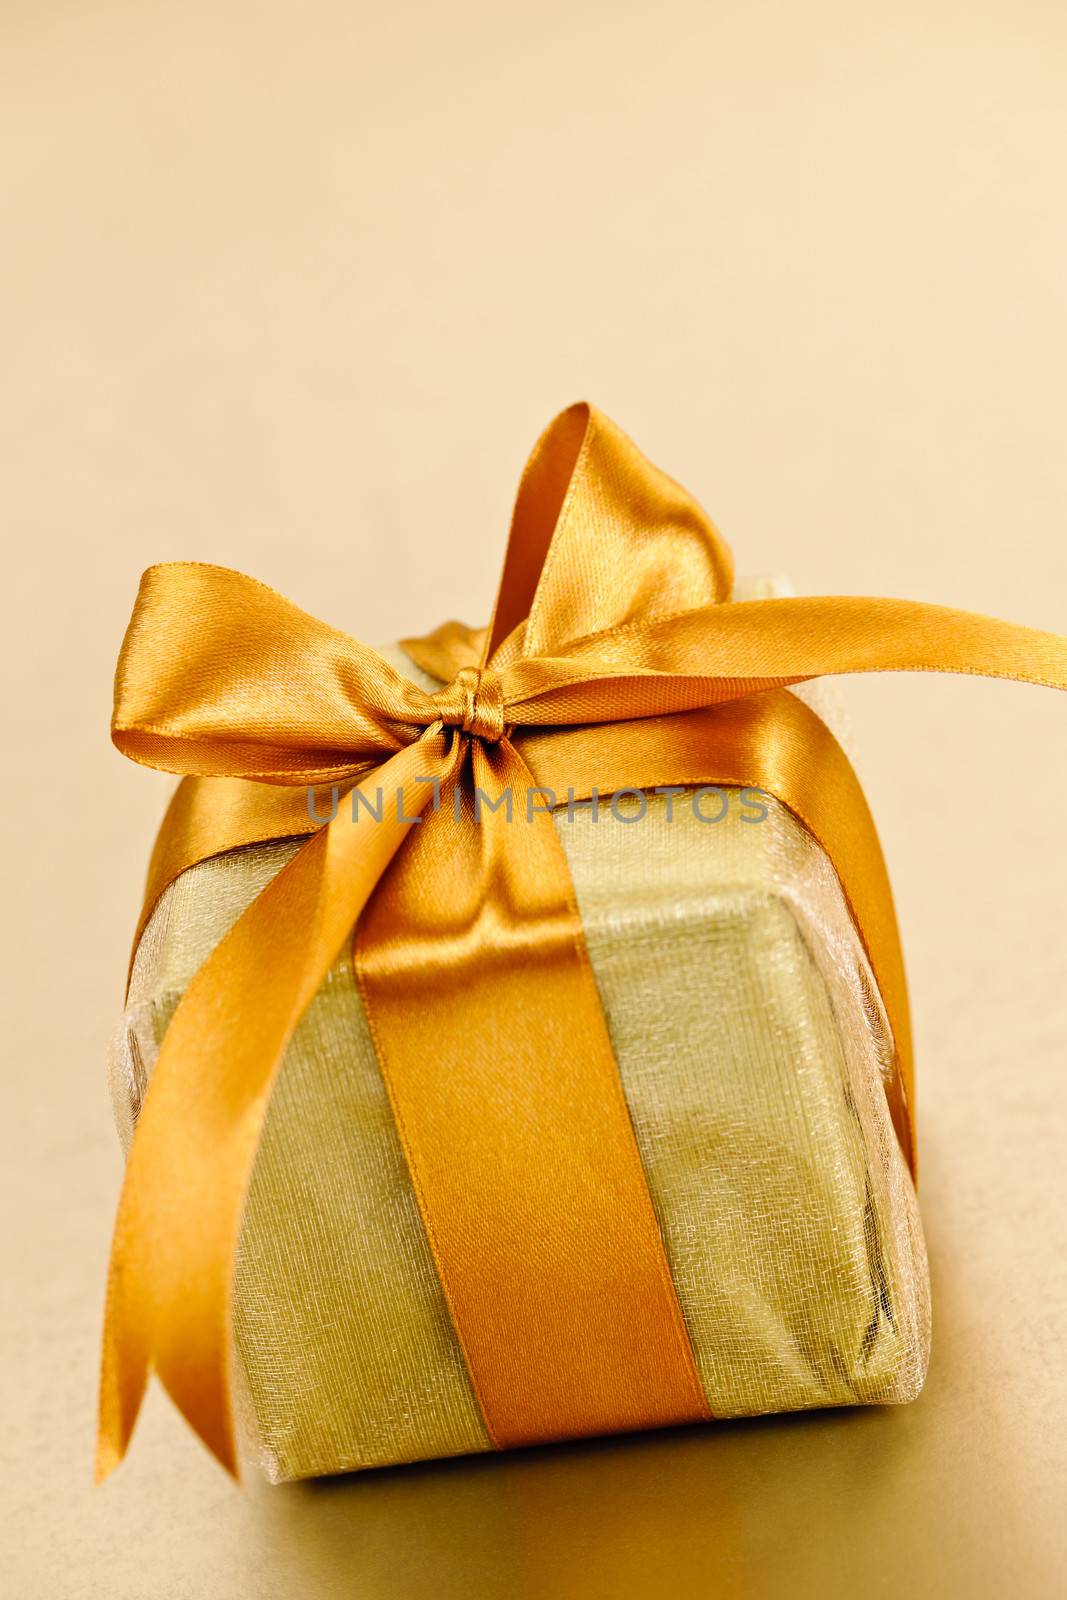 Golden wrapped gift box by elenathewise